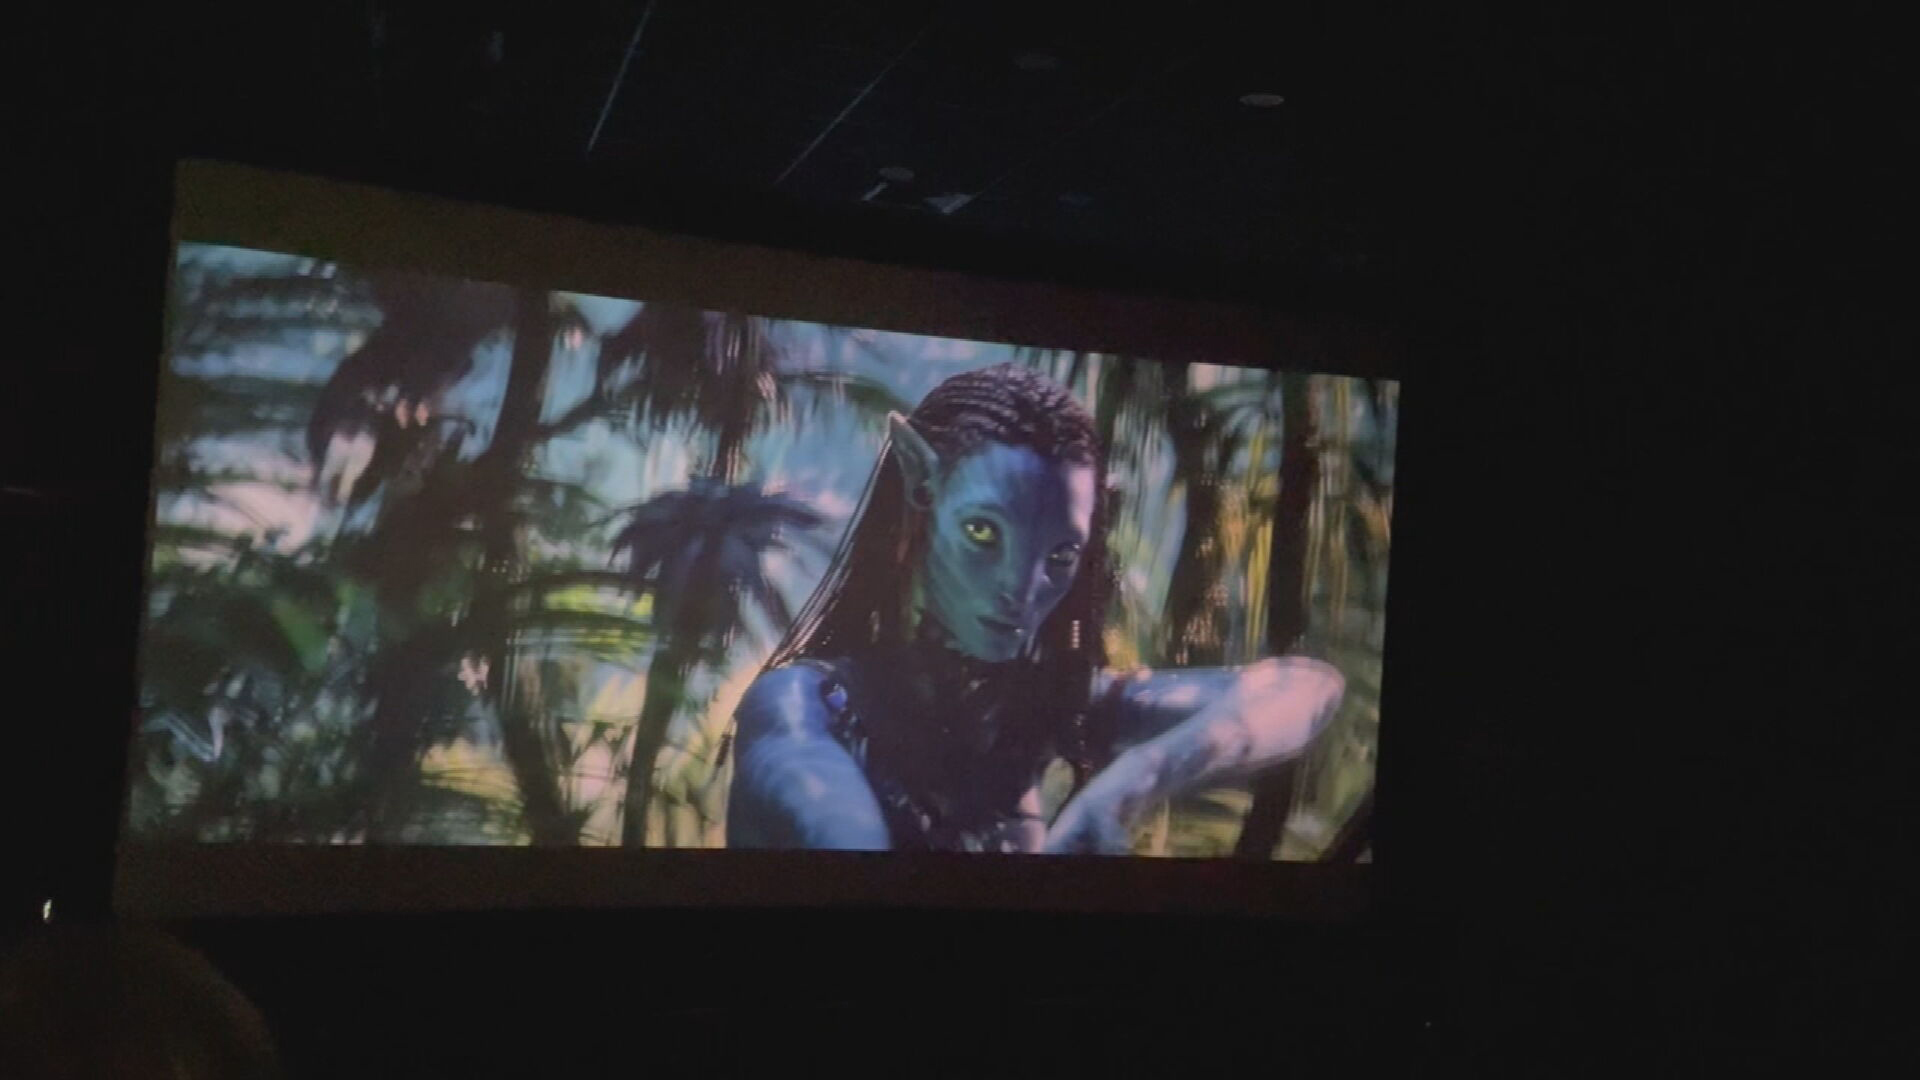 PHOTO: A movie theater in Russia shows a screening of "Avatar: The Way of Water" even after Western movie studios announced they were pausing theatrical releases of their new movies in Russia more than a year ago among many other unprecedented sanctions.